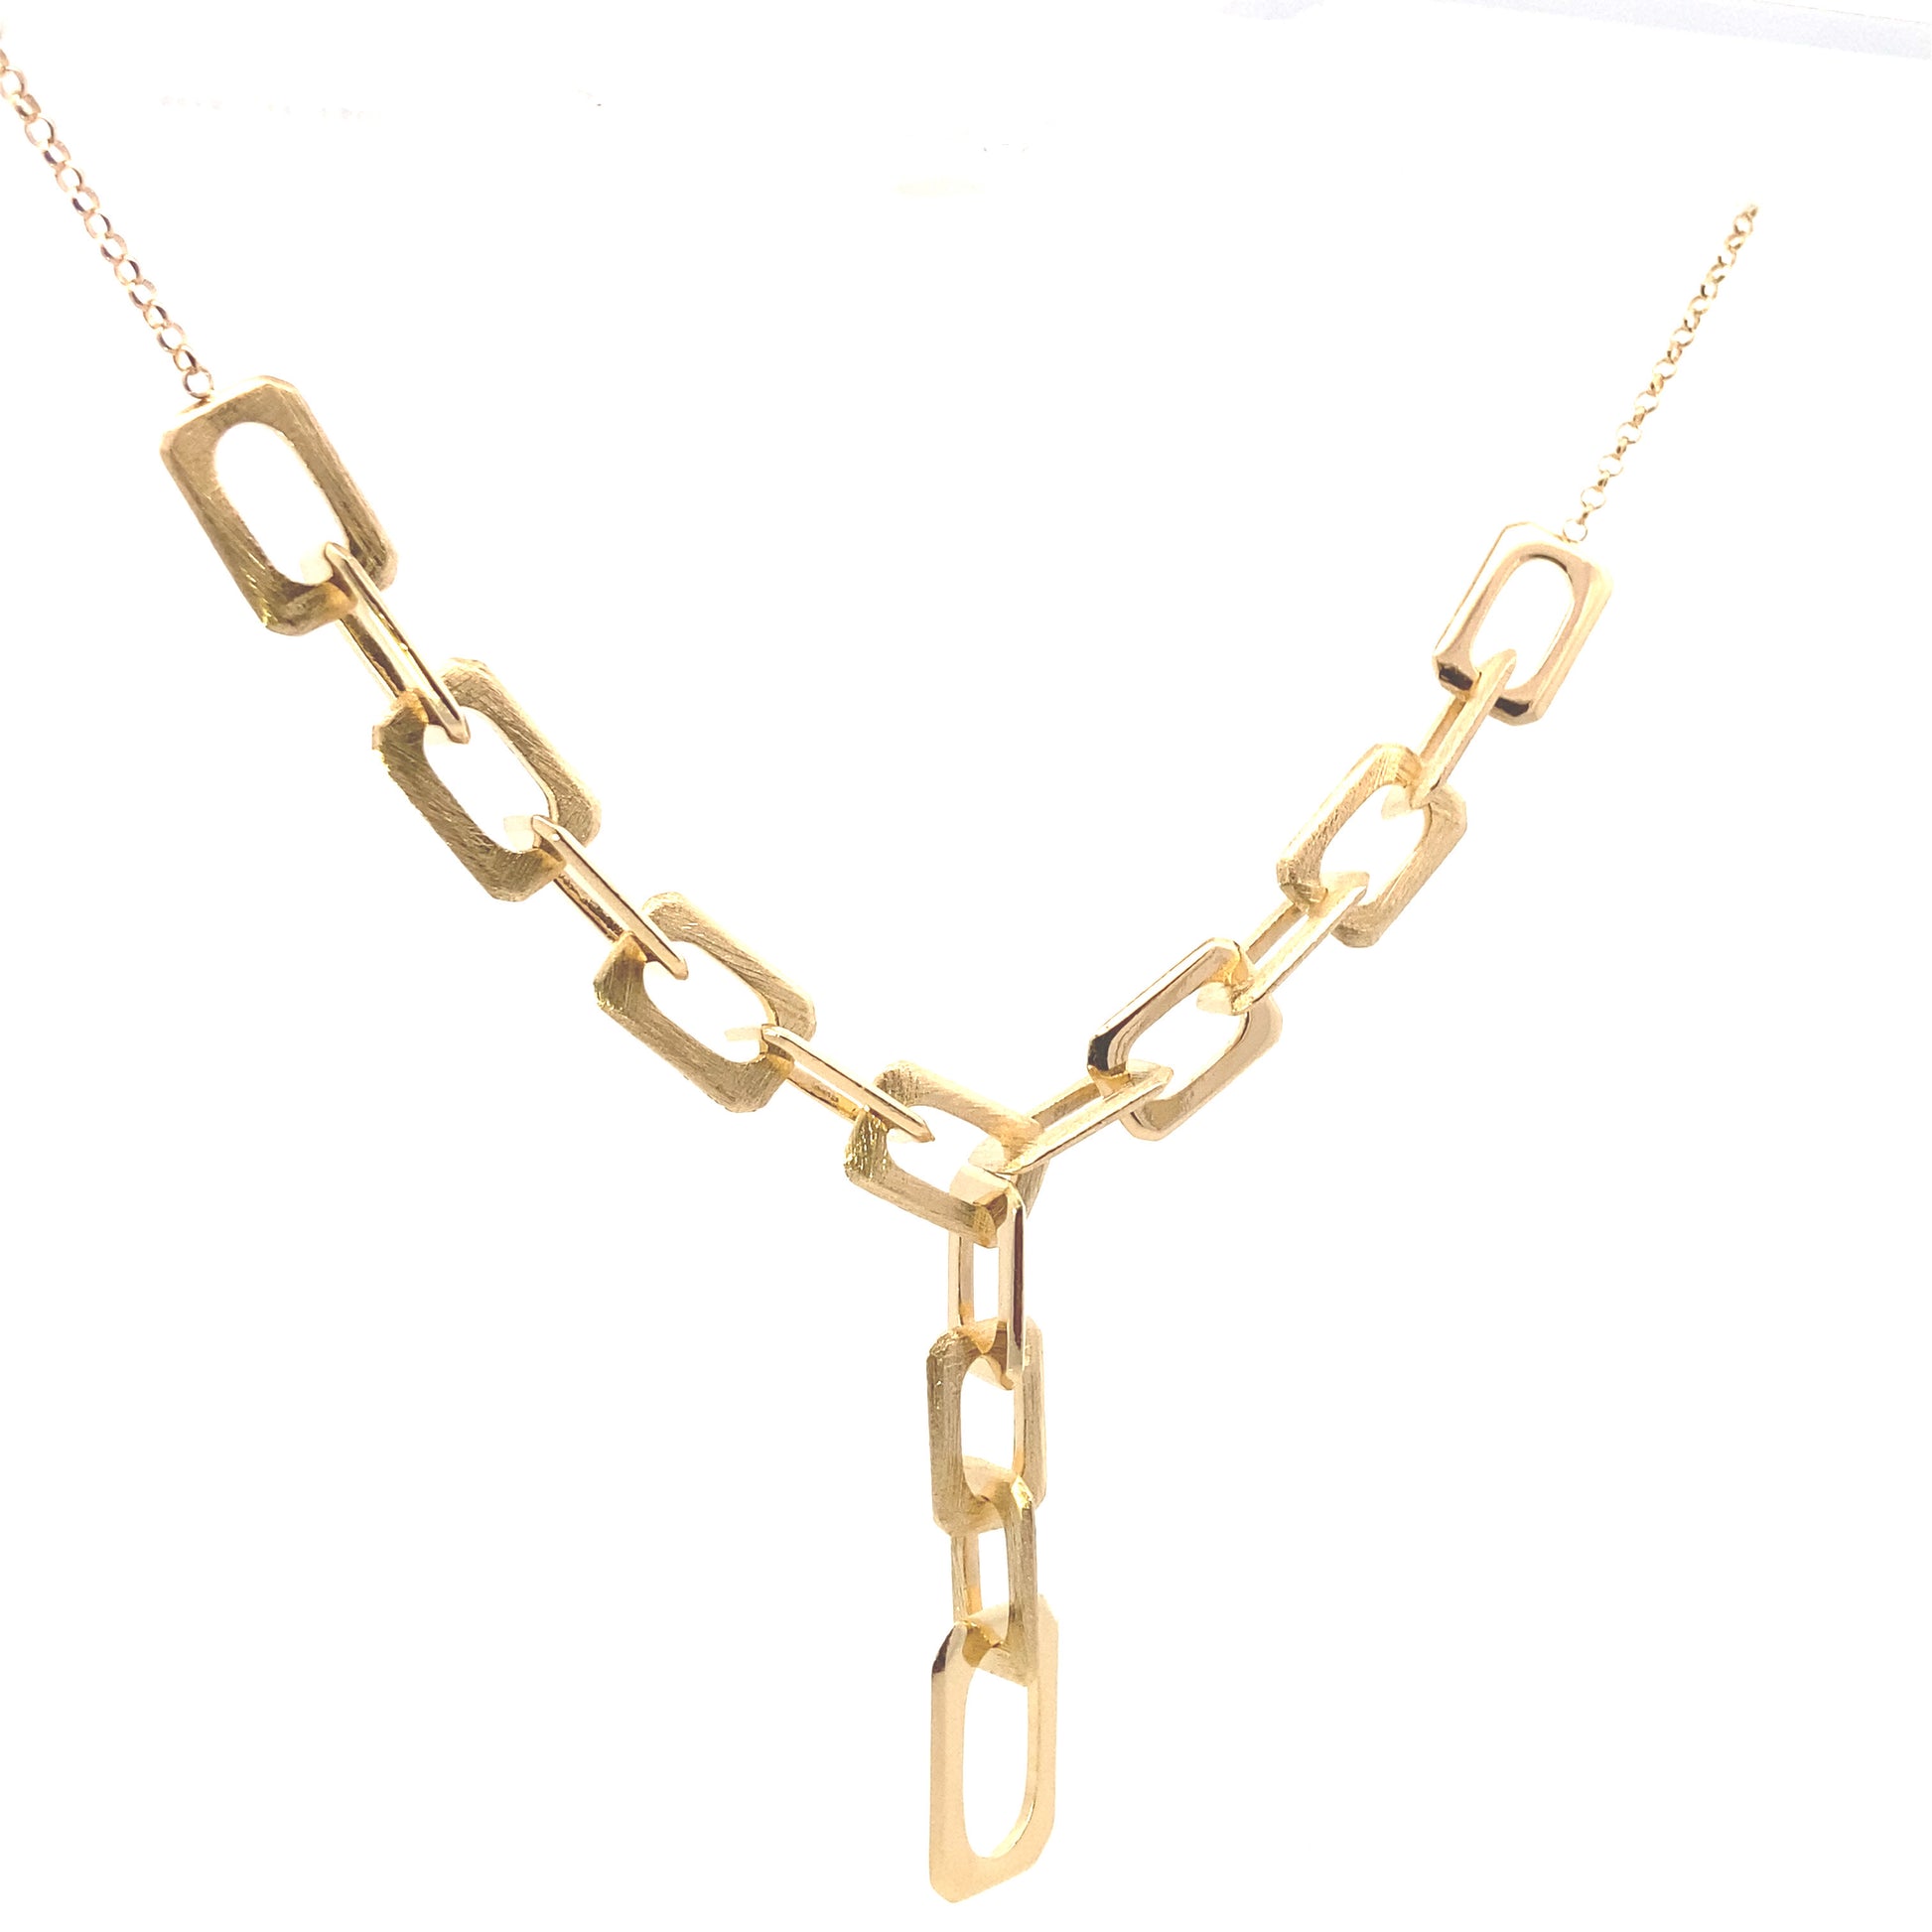 Marcello Pane Staggered Link Necklace | Marcello Pane | Luby 